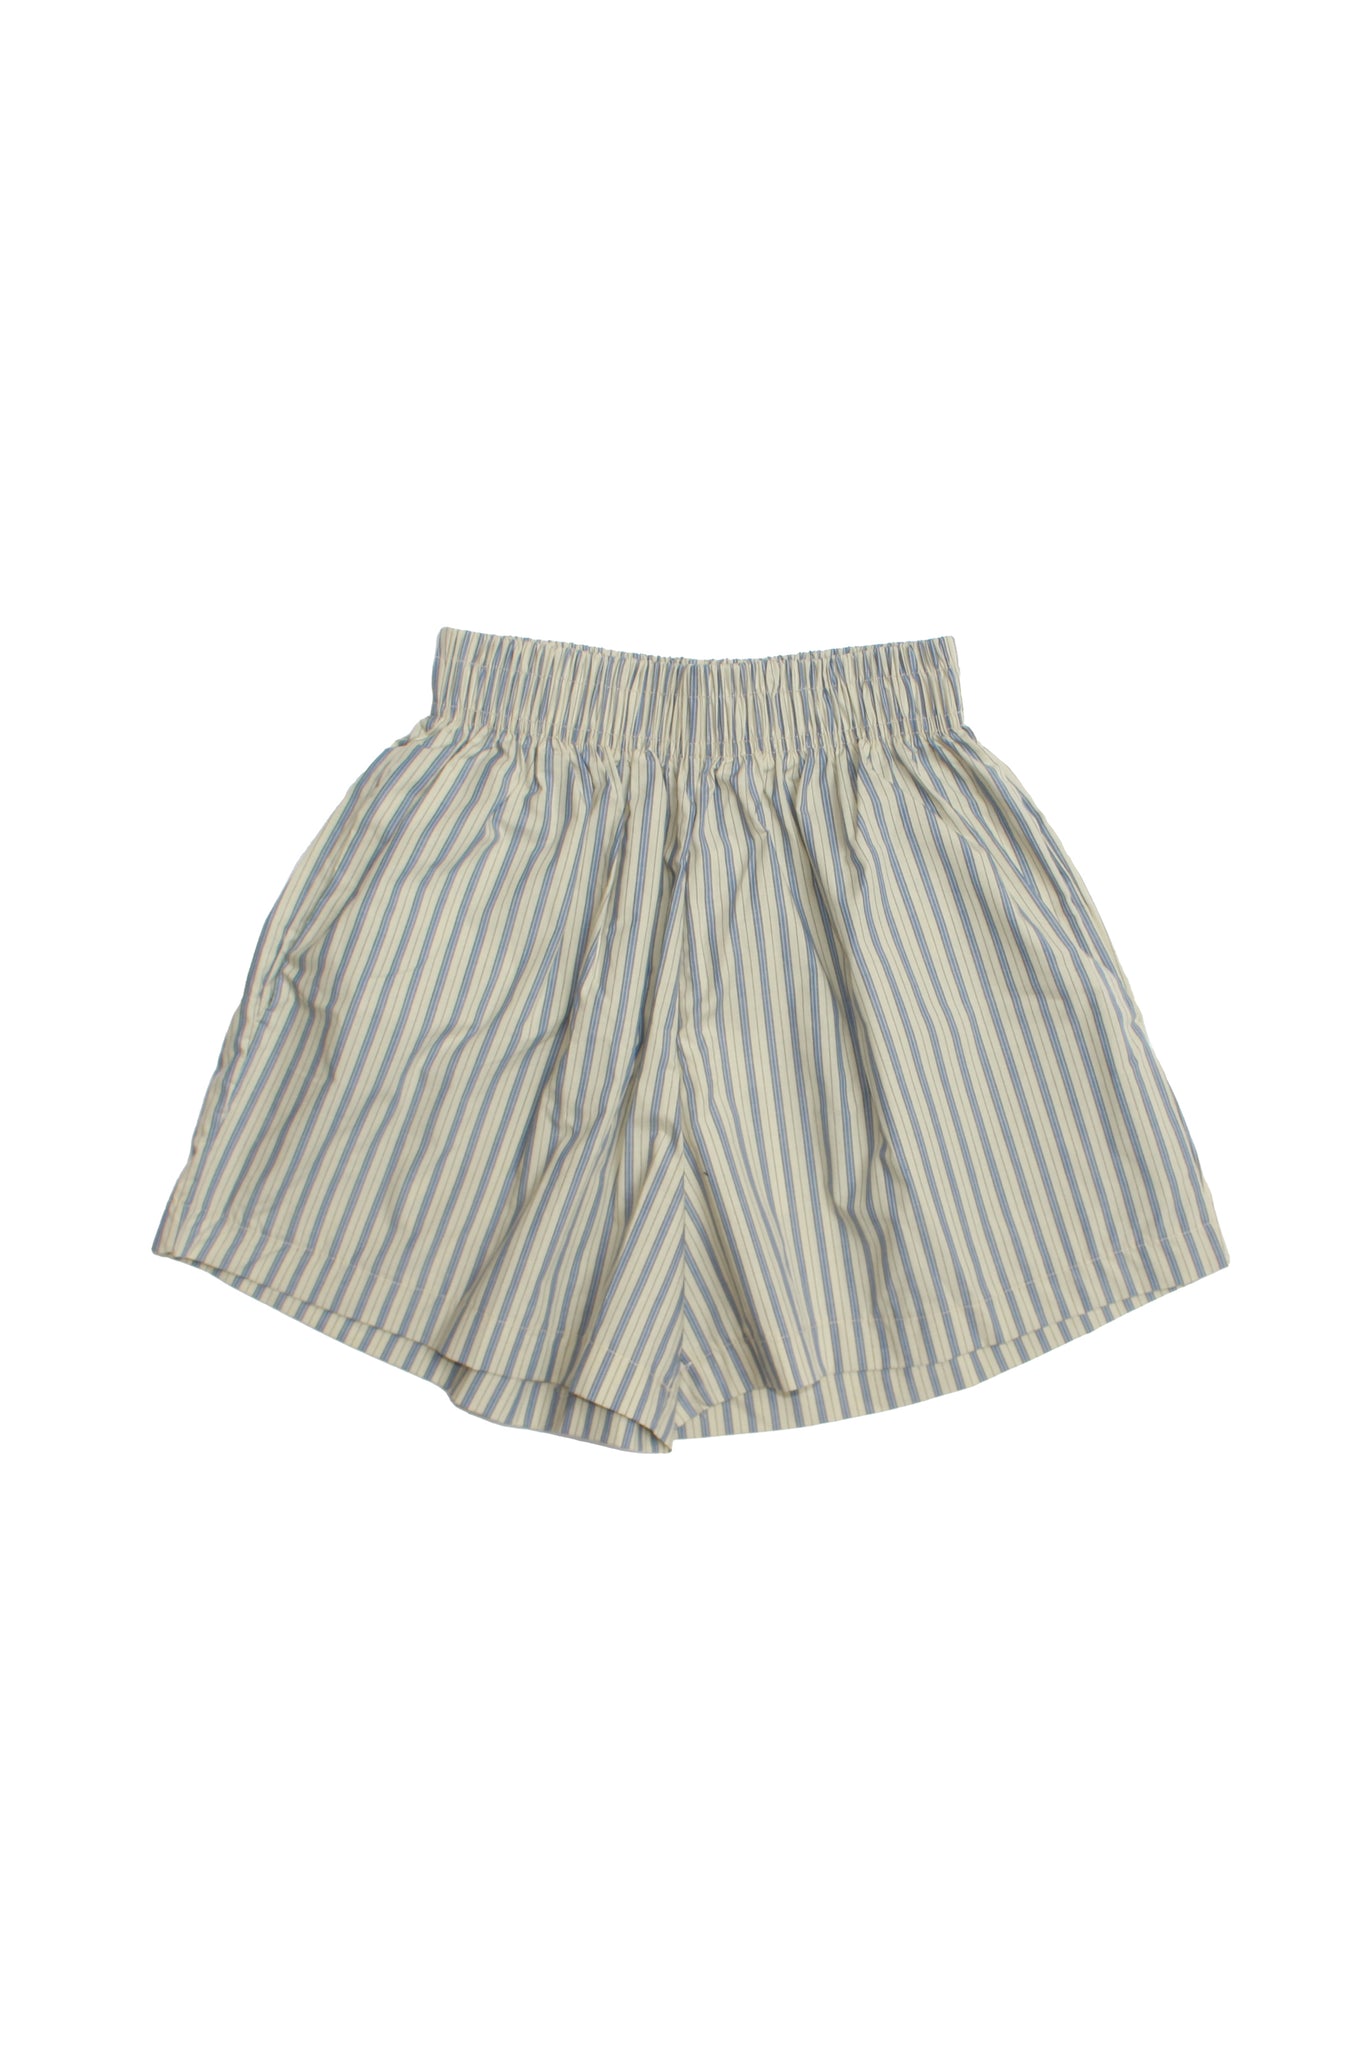 Cotton Stripe Shorts in Ivory